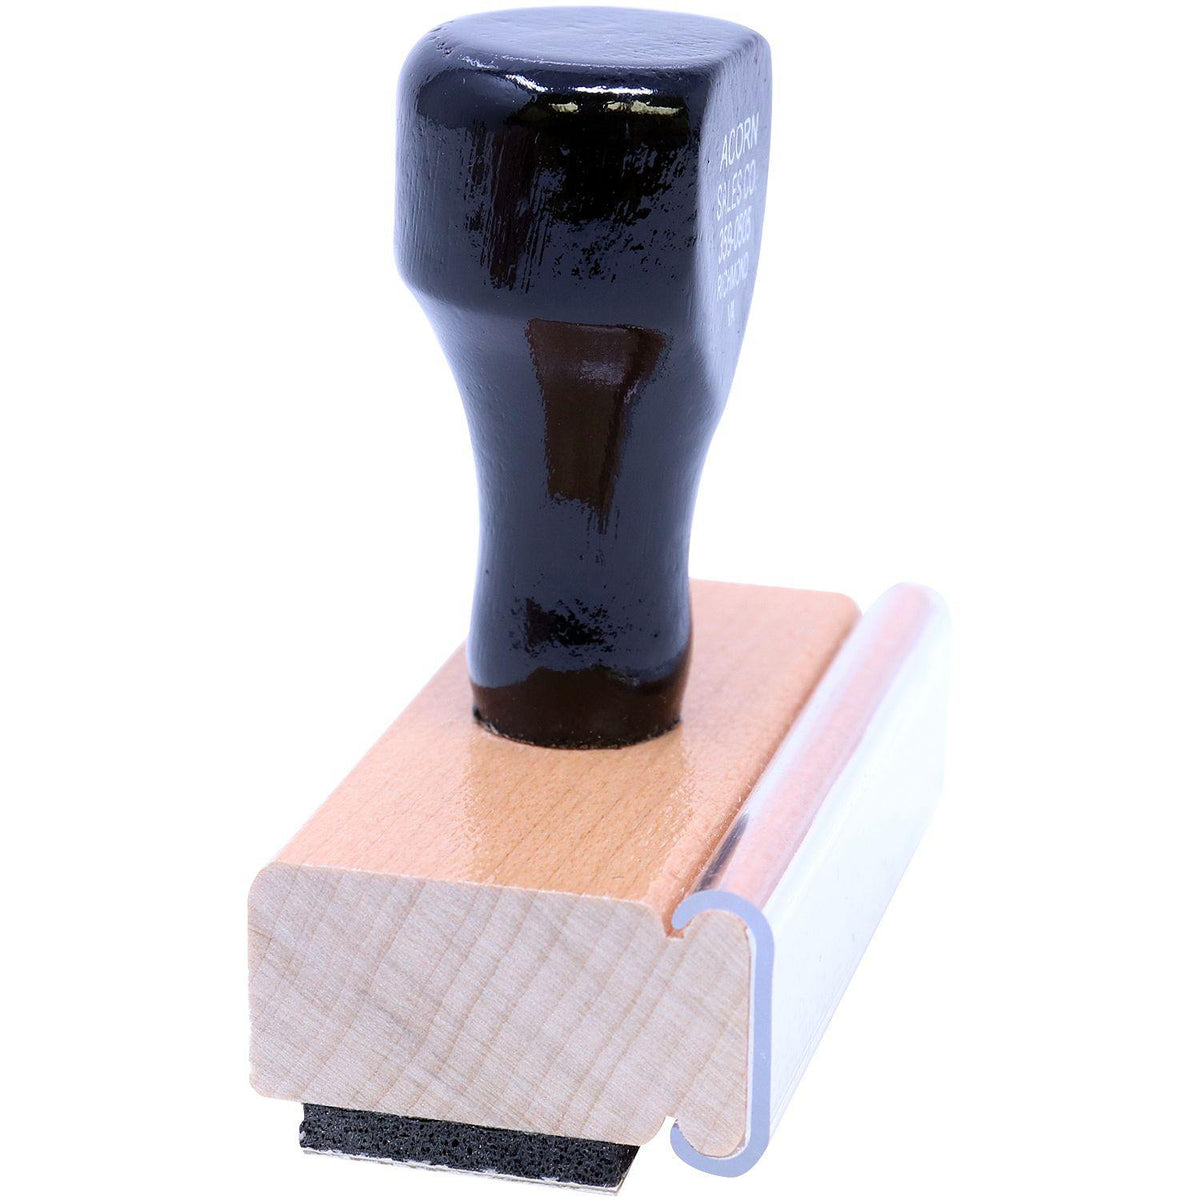 Side View of Large Narrow Benefits Assigned Rubber Stamp at an Angle